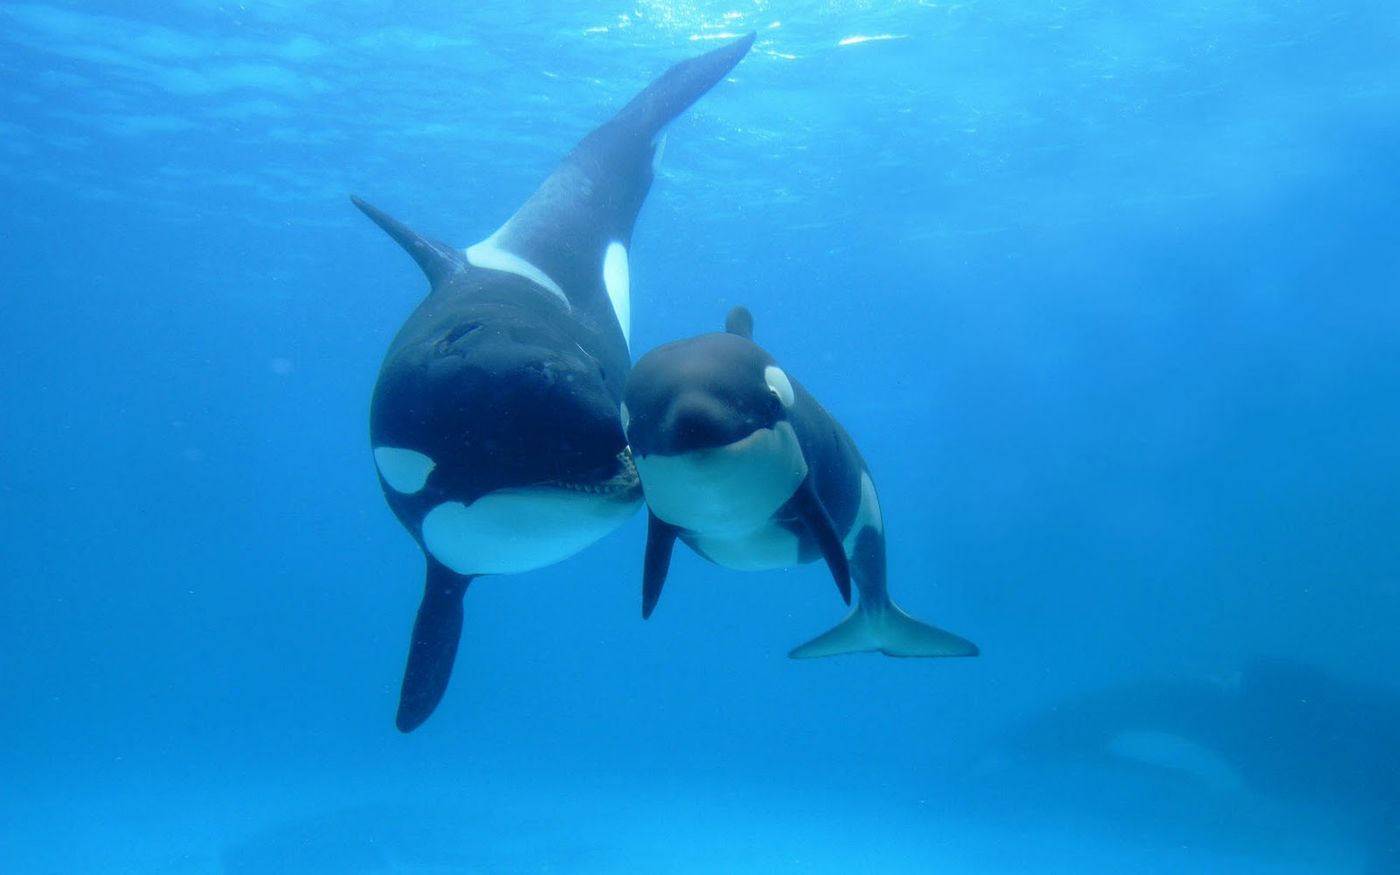 Older female killer whales may experience menopause to reduce competition with younger calves in the pod.